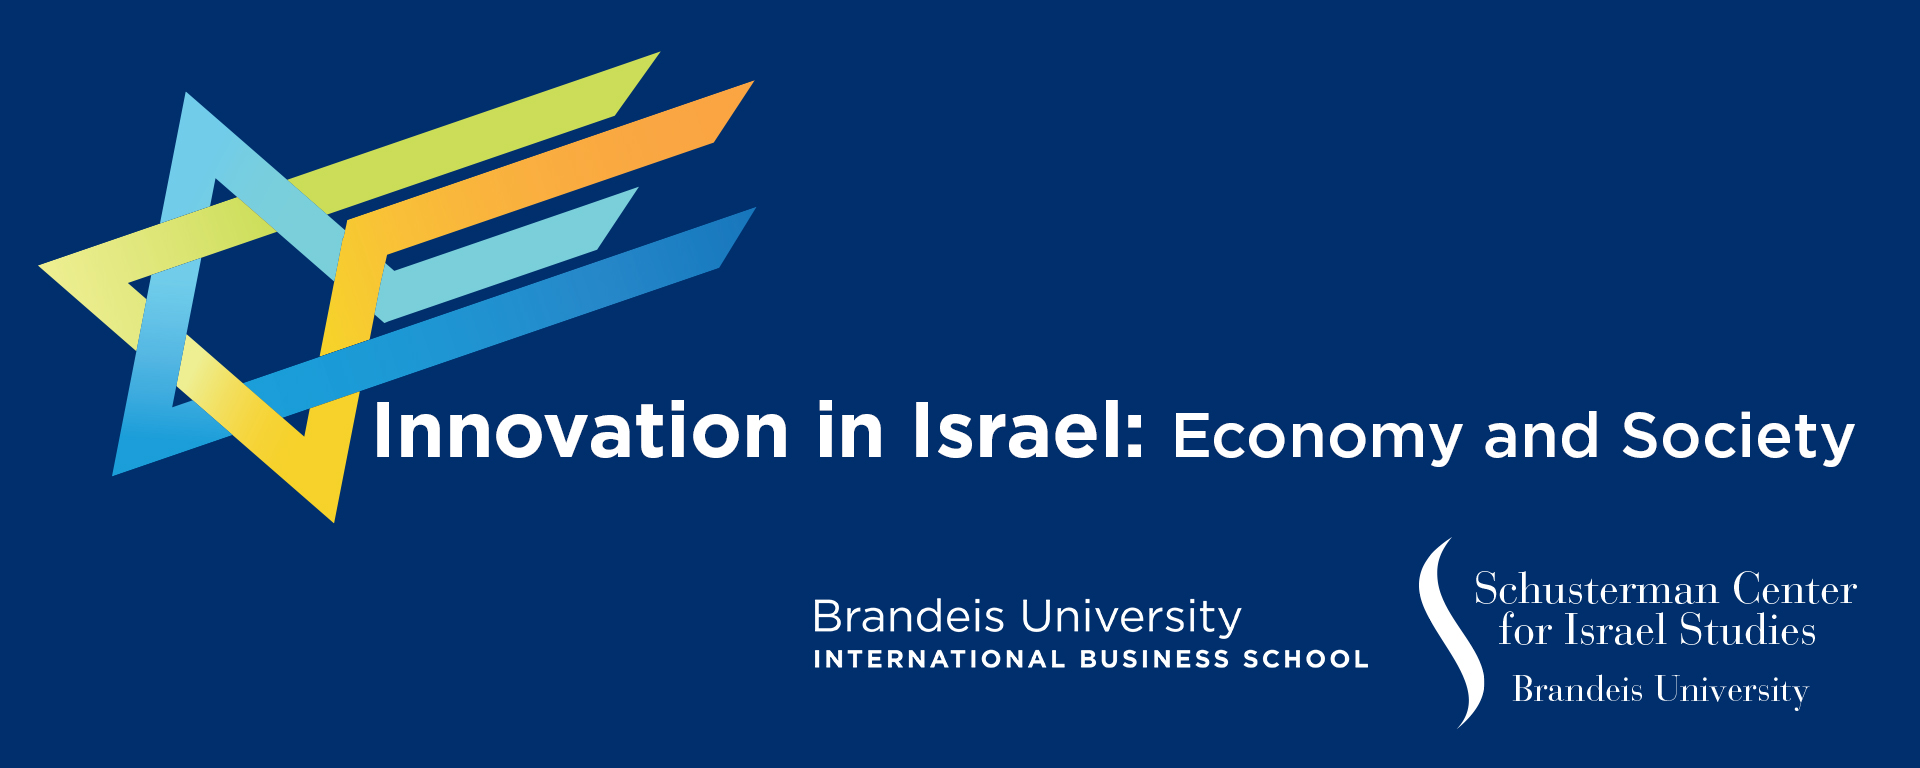 Colorful Star of David with four lines extended to the right .Text reads: Innovation in Israel: Economy and Society. Brandeis IBS and Schusterman Center logos. 